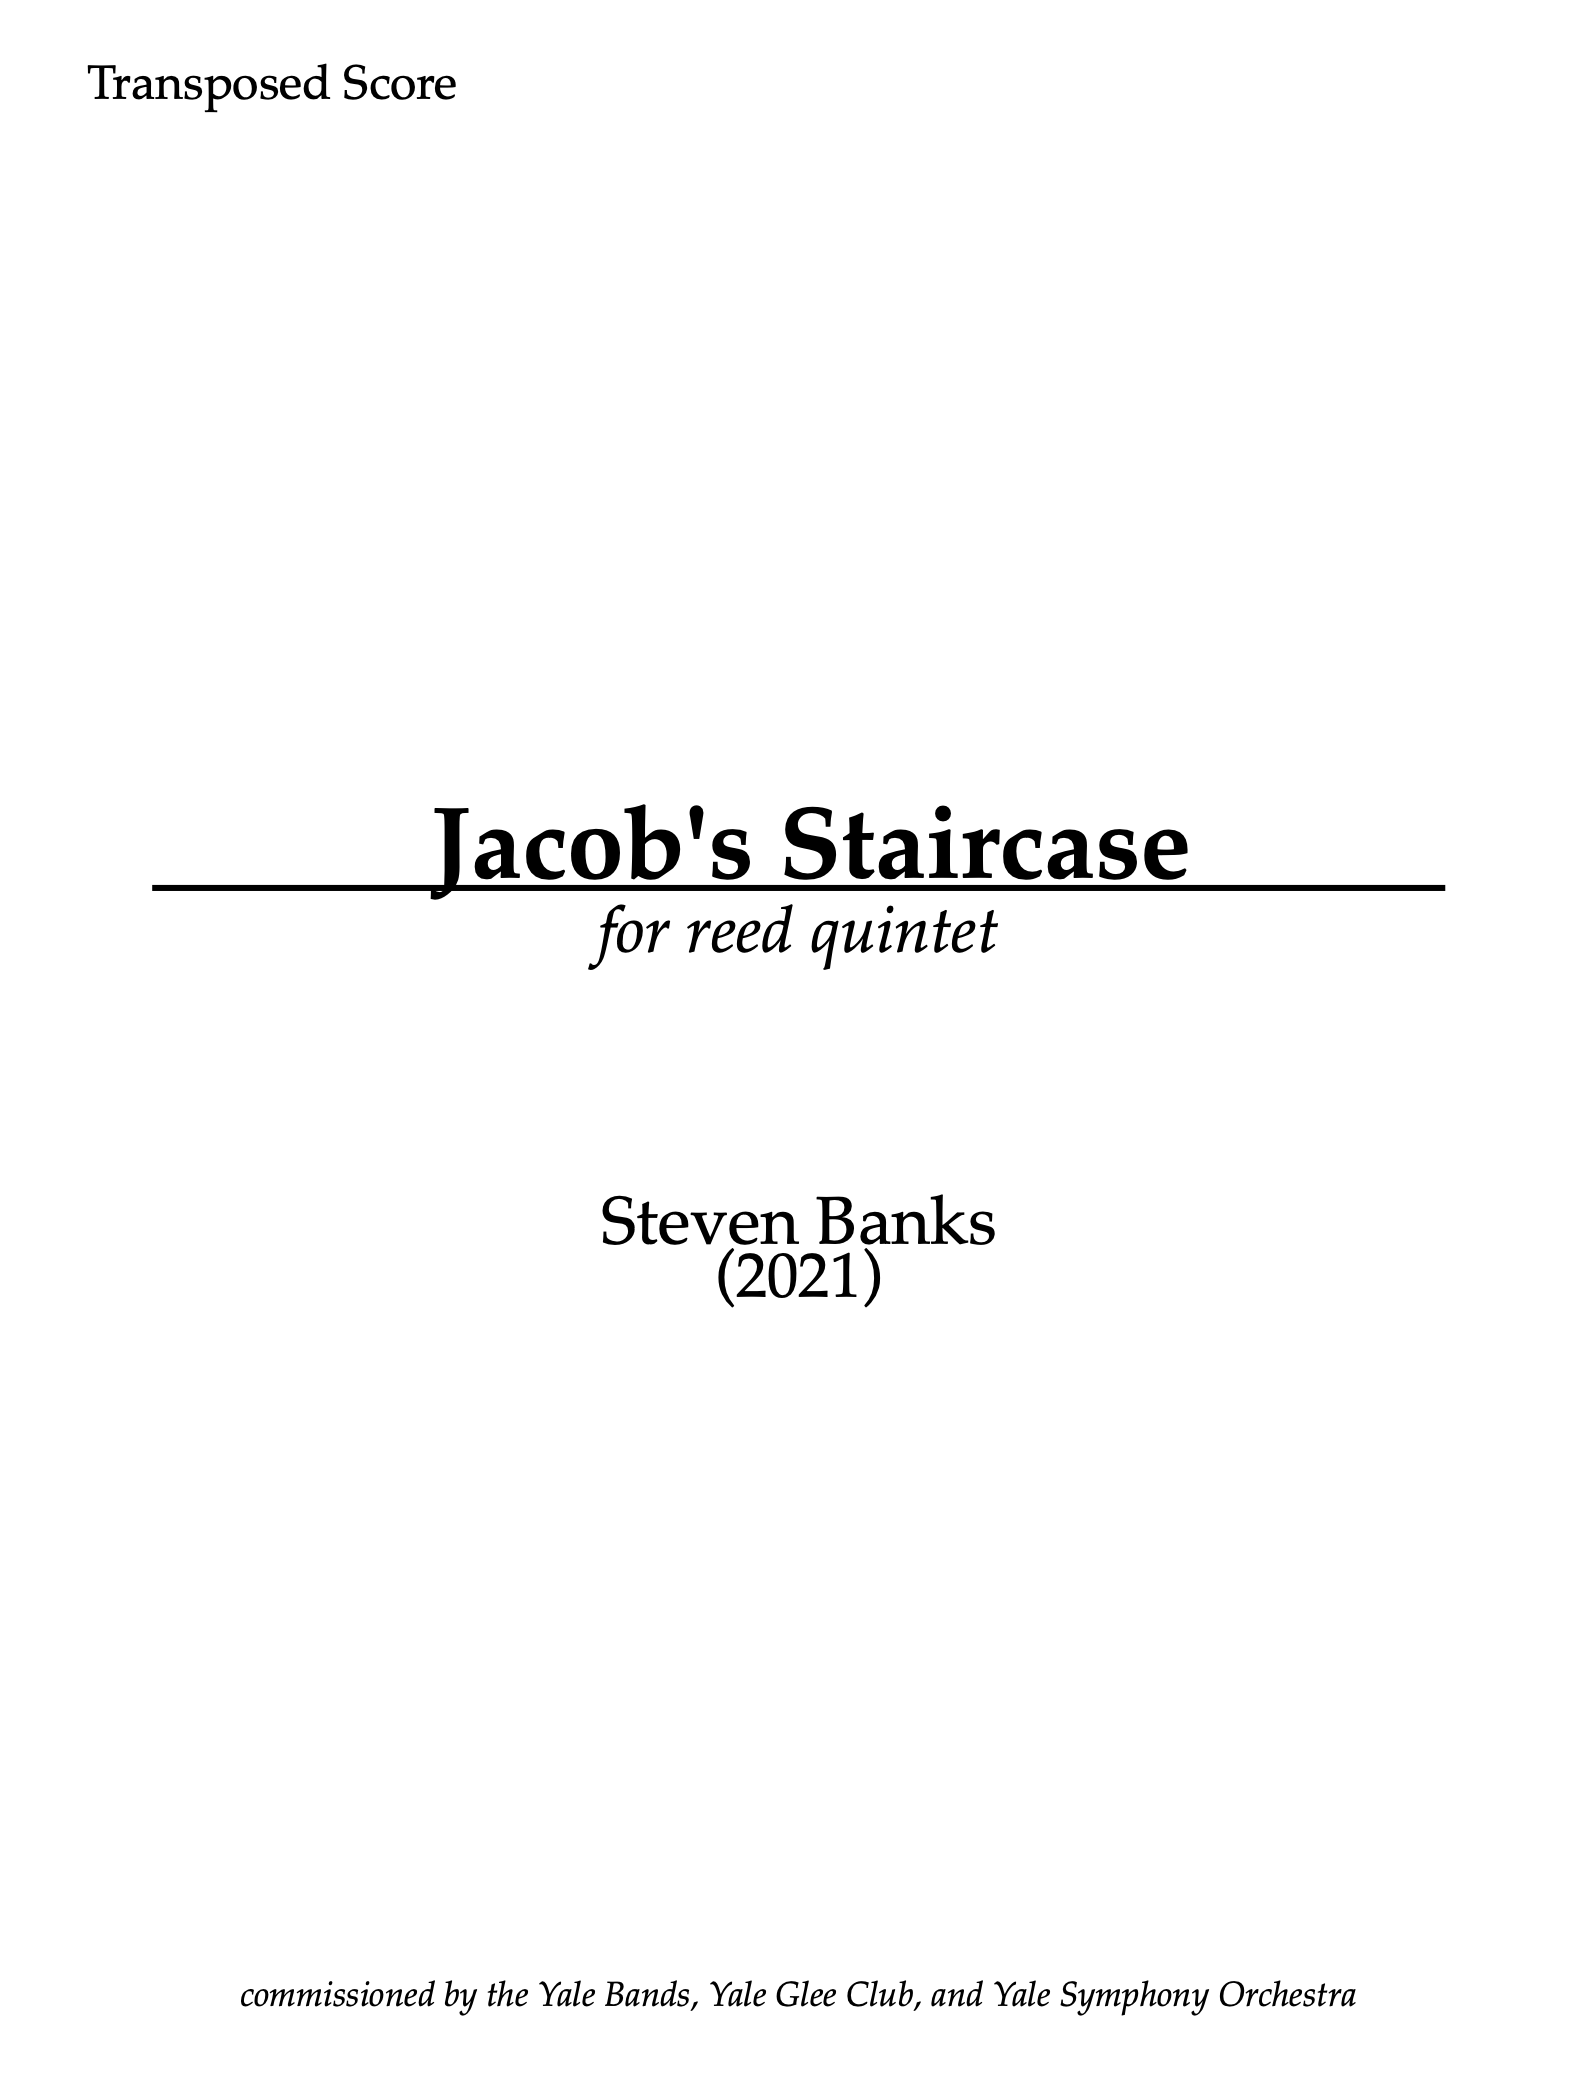 Jacob's Staircase by Steven Banks